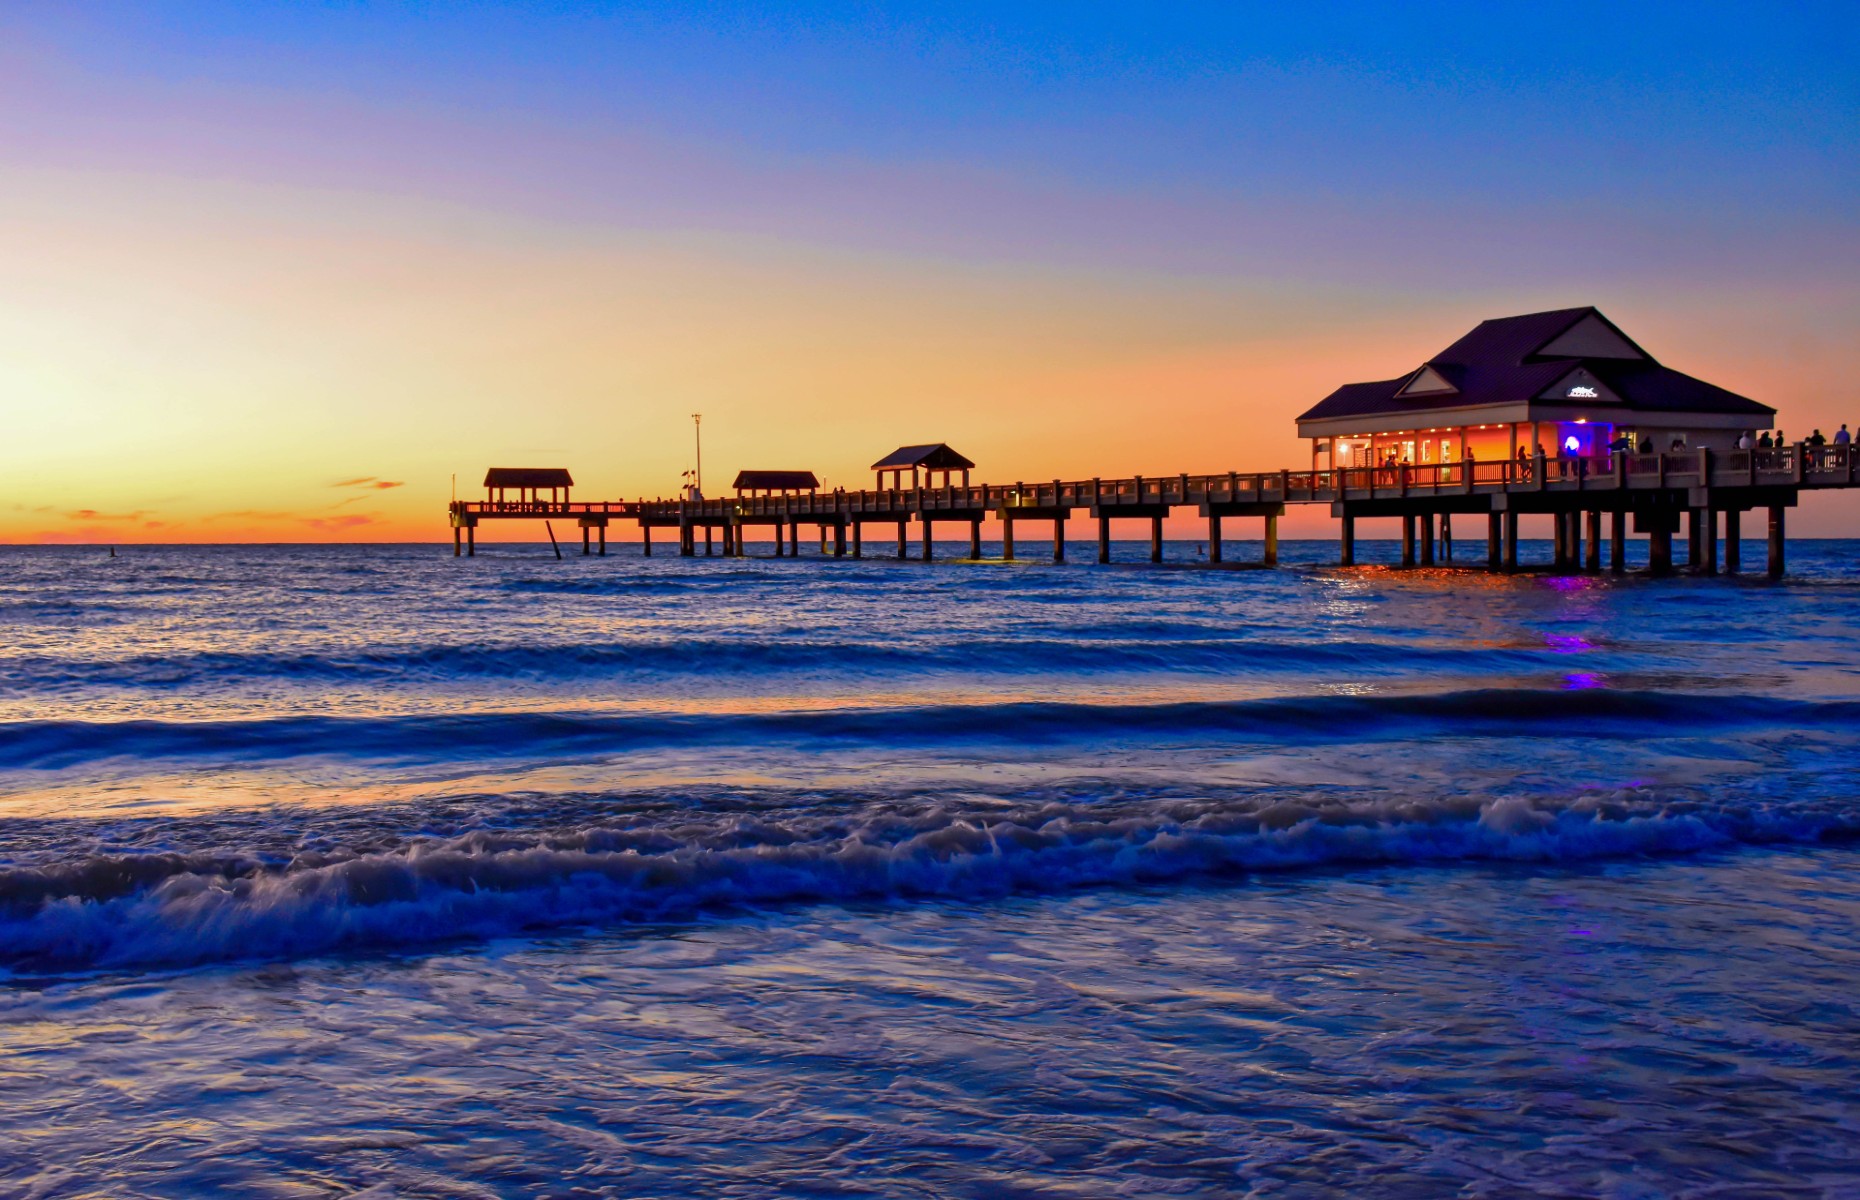 Sunset at Pier 60 on Clearwater Beach (Image: VIAVAL TOURS/Shutterstock)